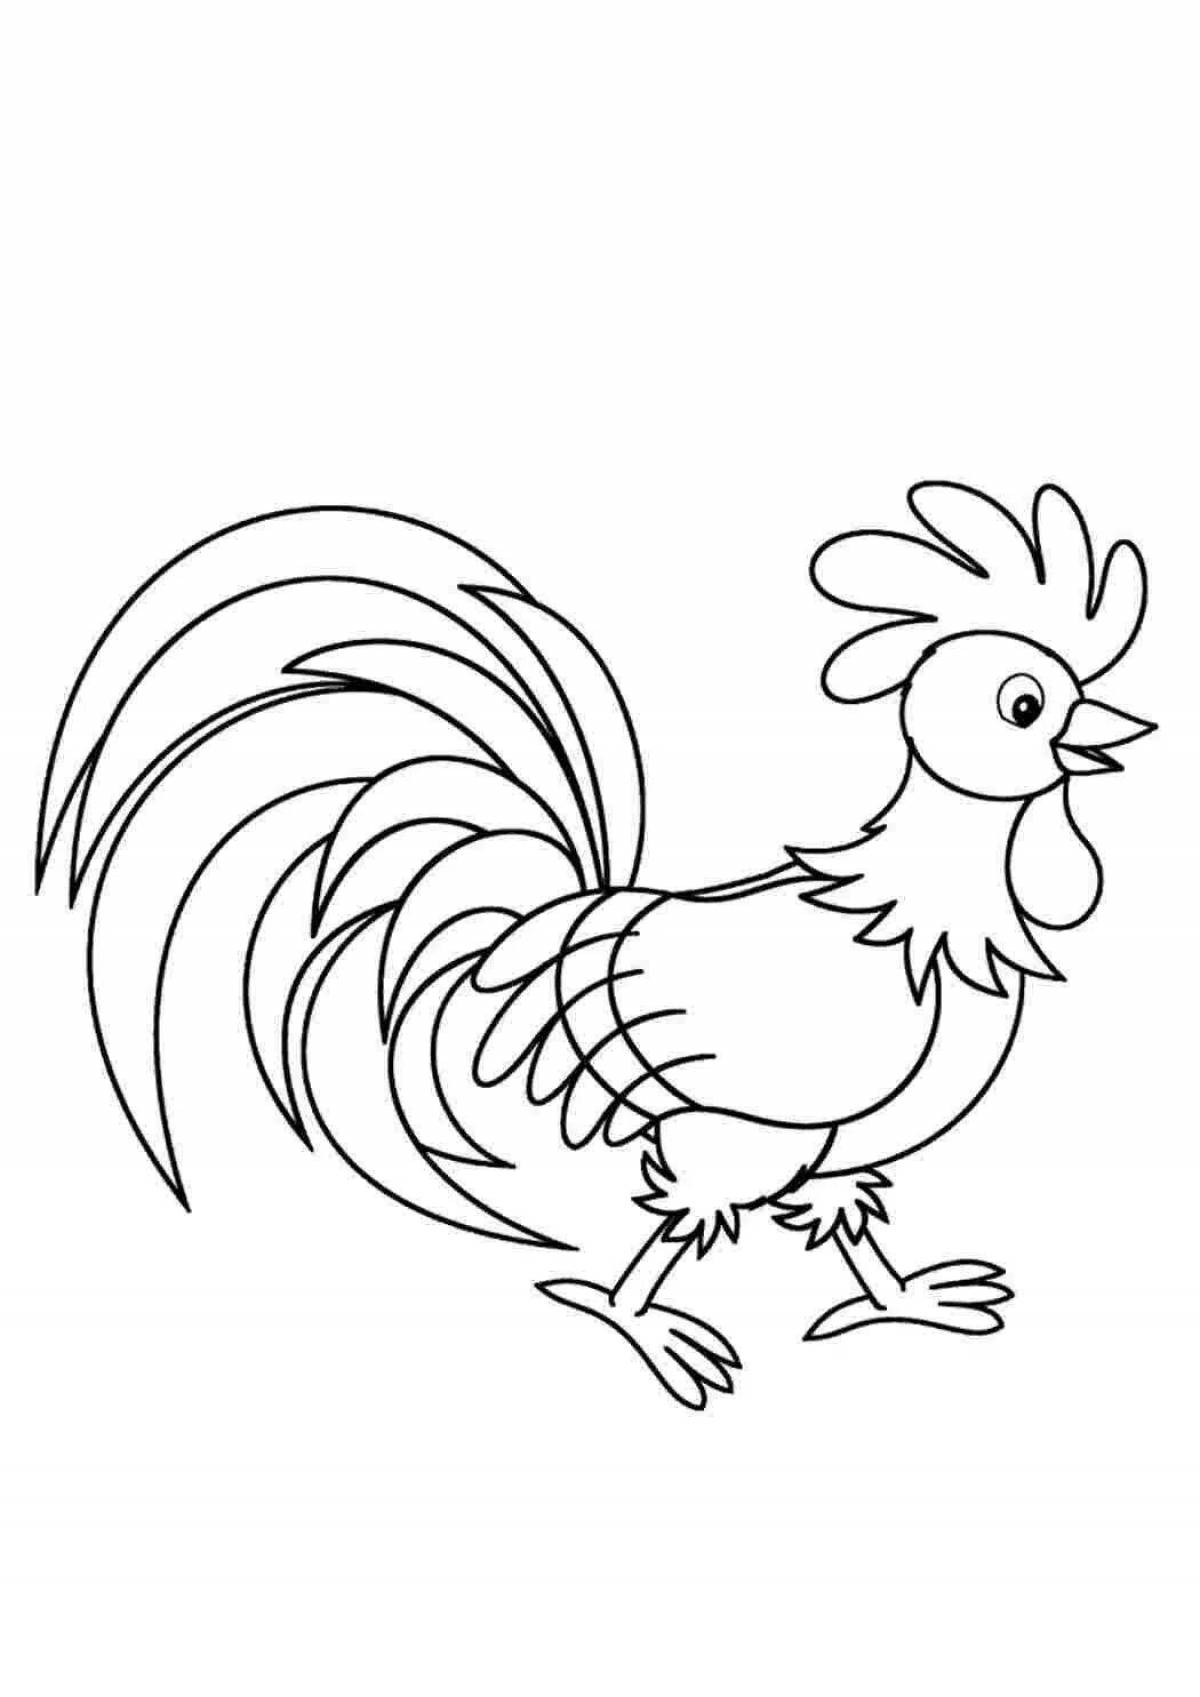 Live cockerel coloring pages for kids